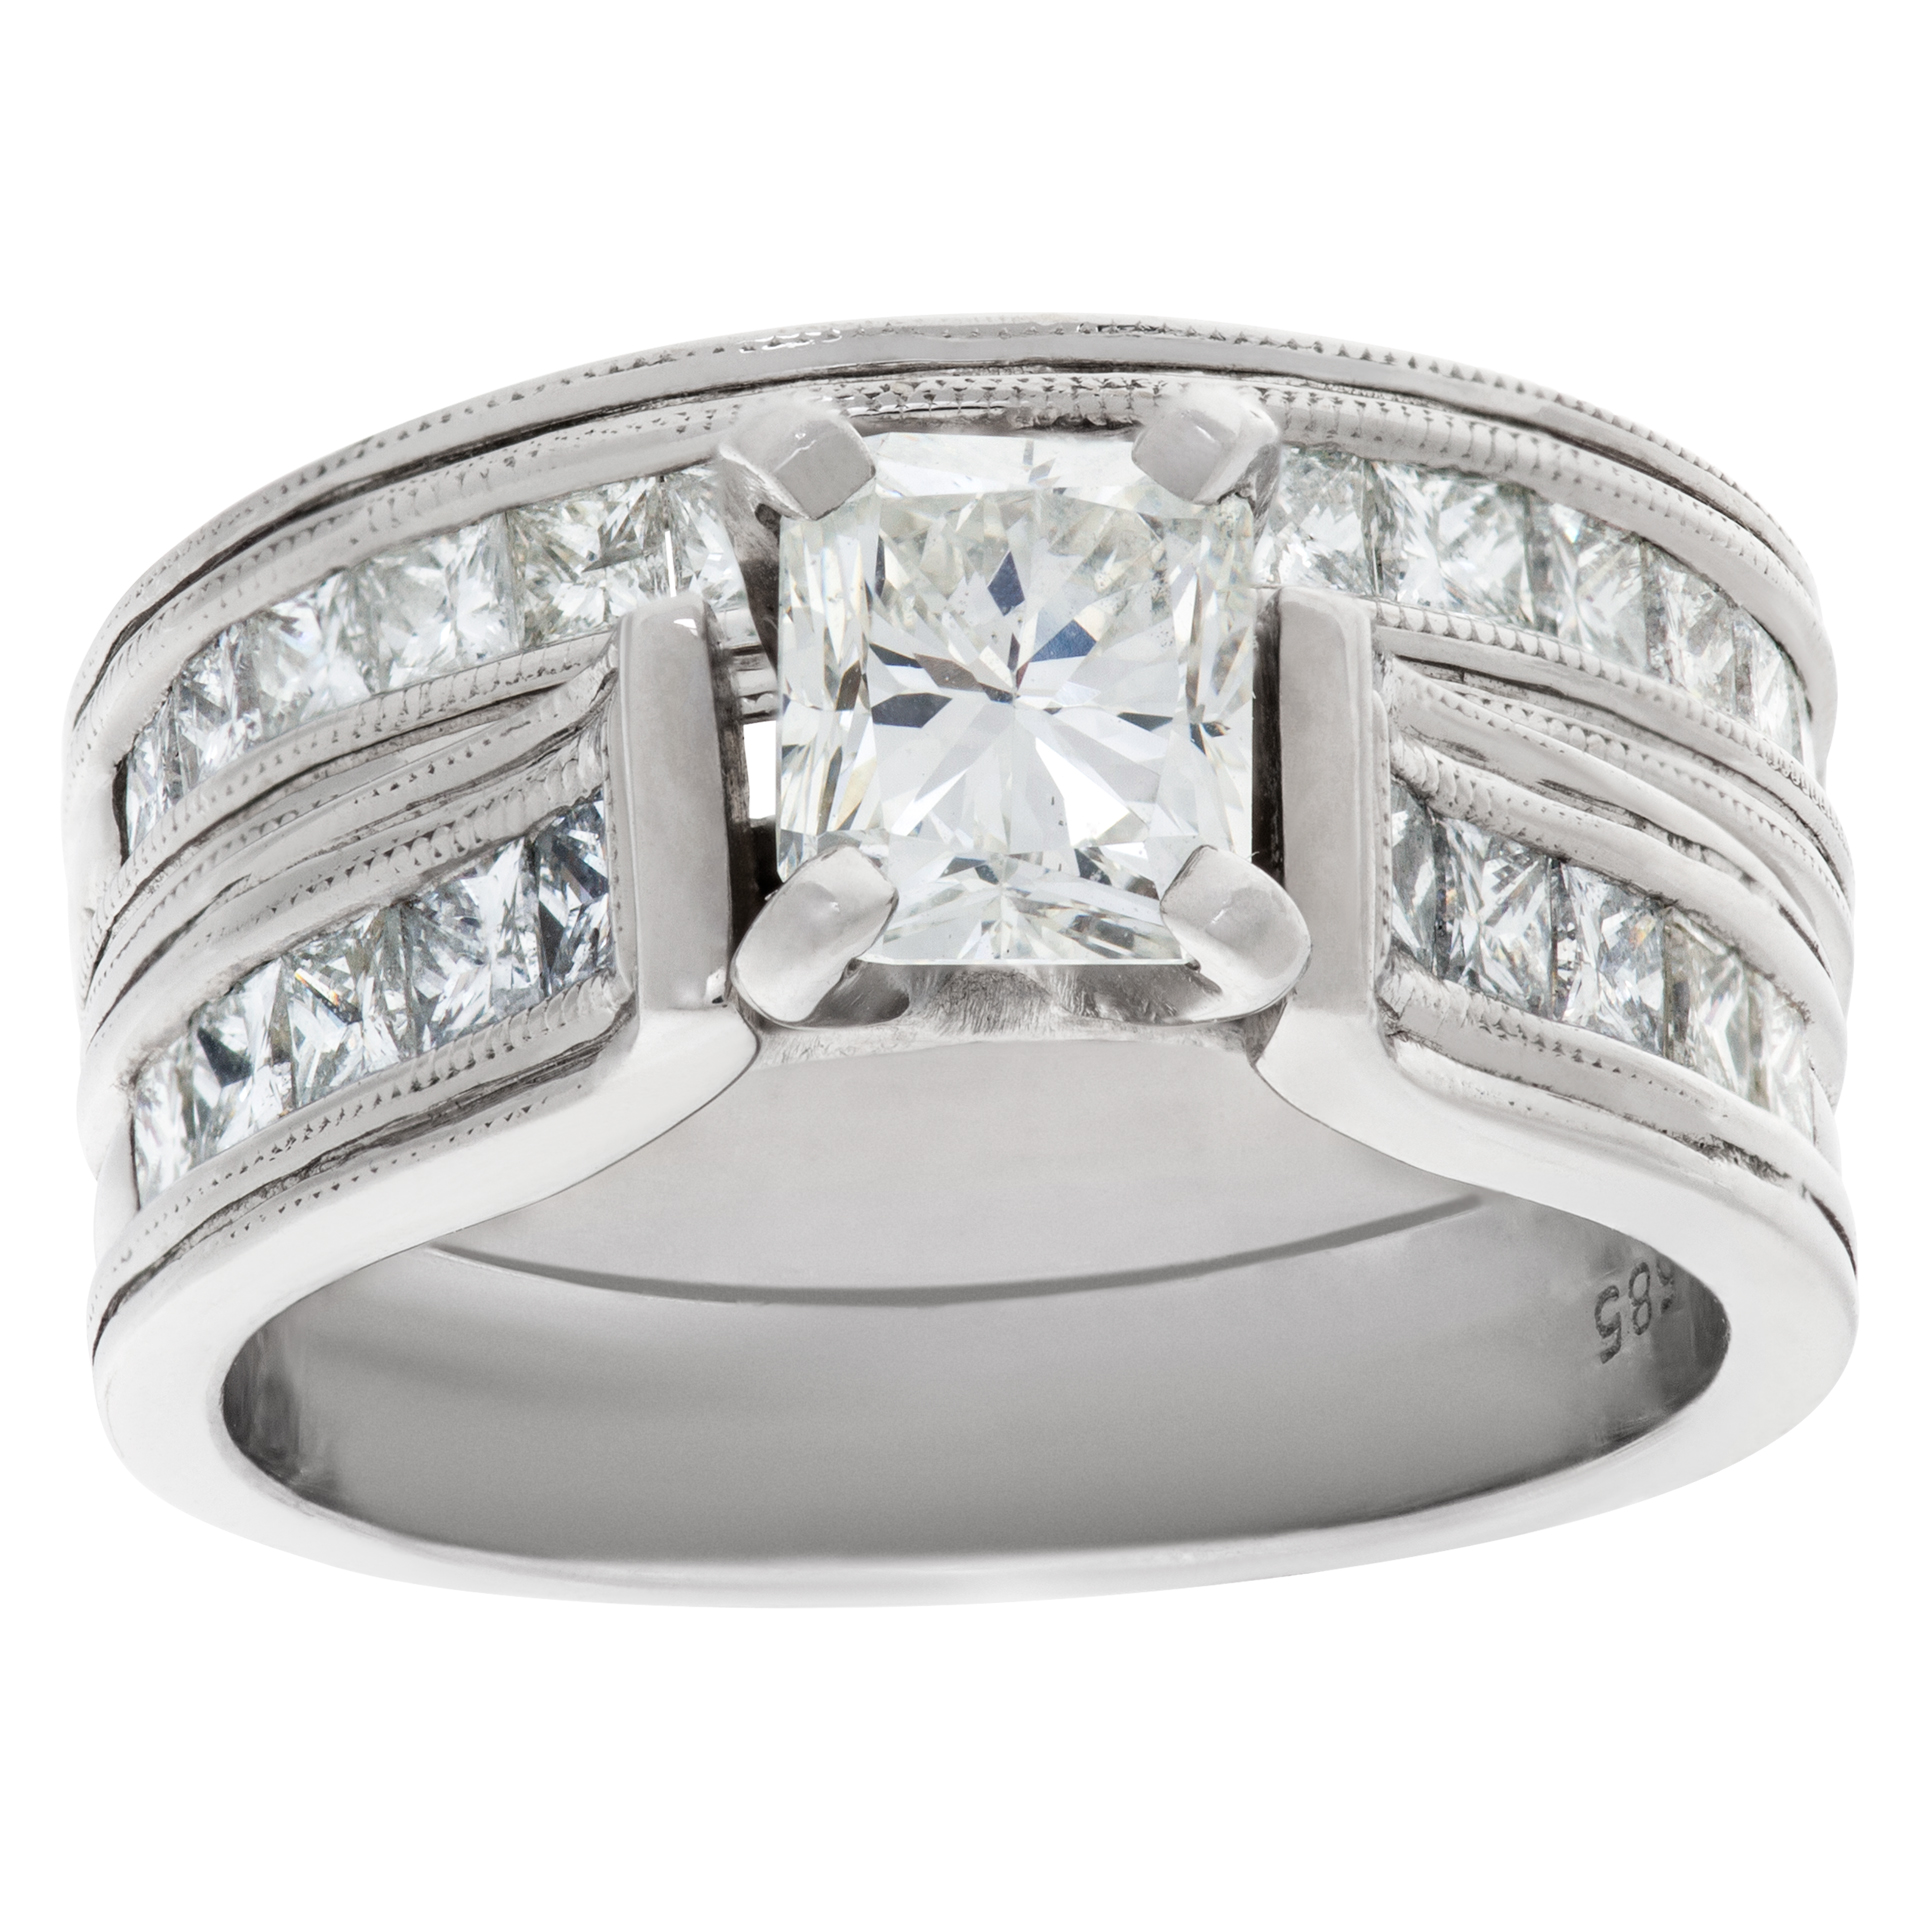 Diamond engagement ring set in 14k white gold. 0.75 ct center diamond (J color, SI1 clarity) image 1